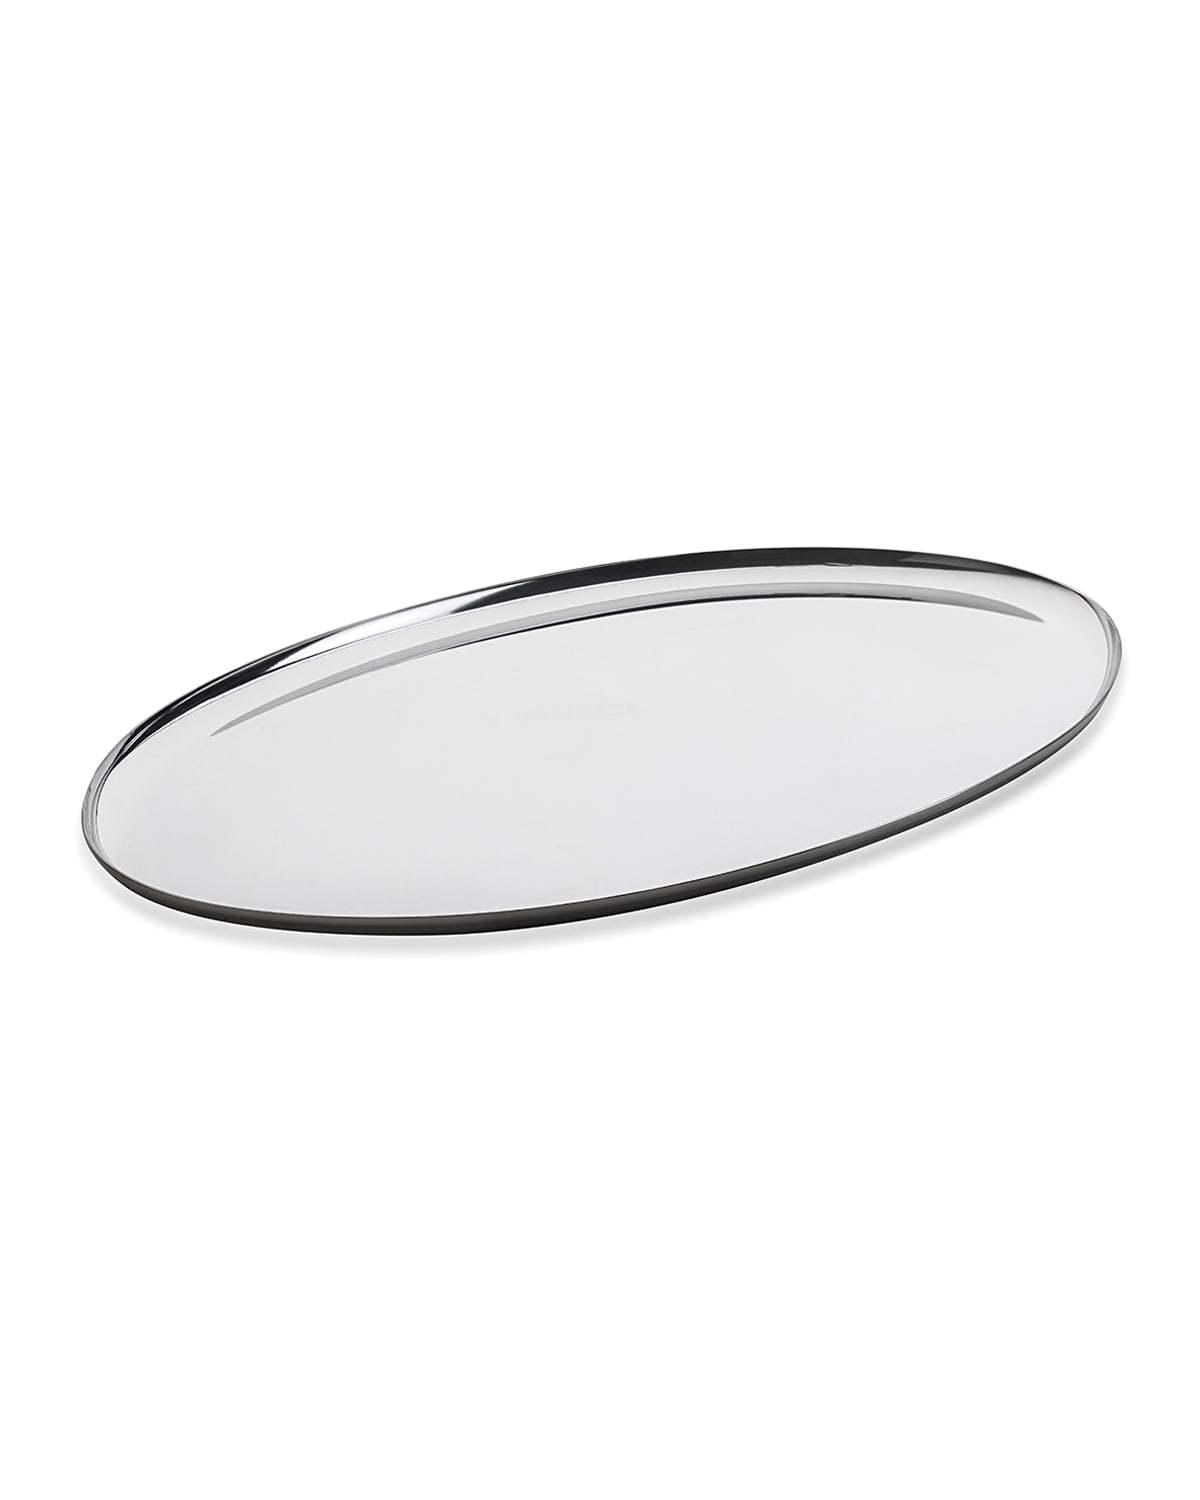 Mepra Original Vintage Oval Tray, Stainless Steel, Made in Italy